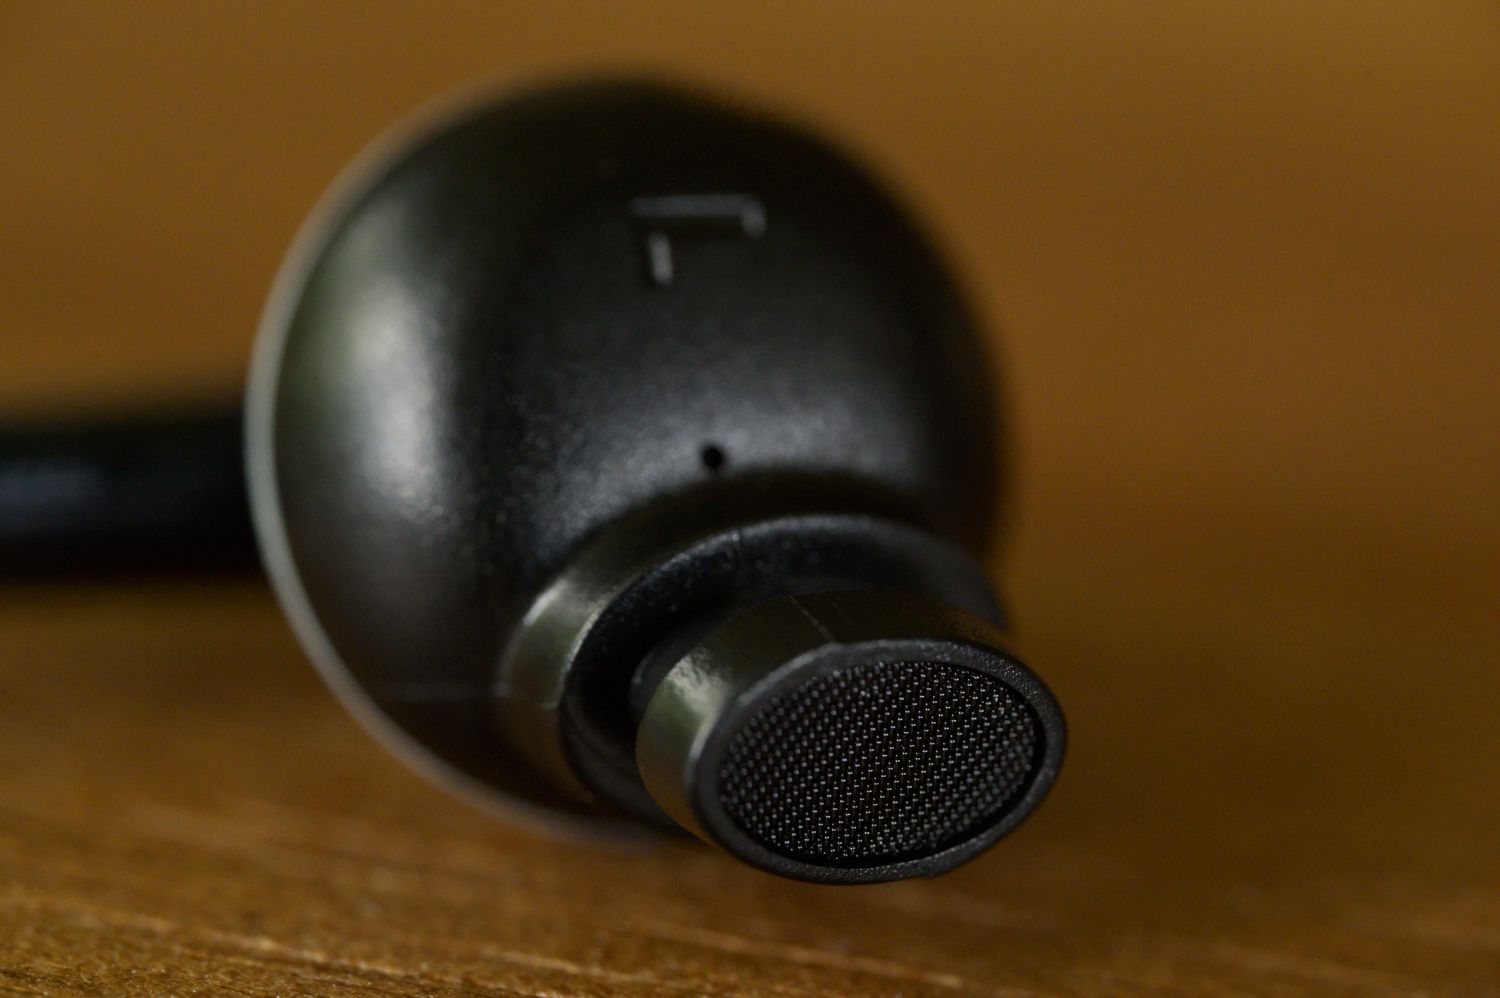 panasonic-ergofit-earbuds-review-quality-earbuds-from-the-bargain-bin